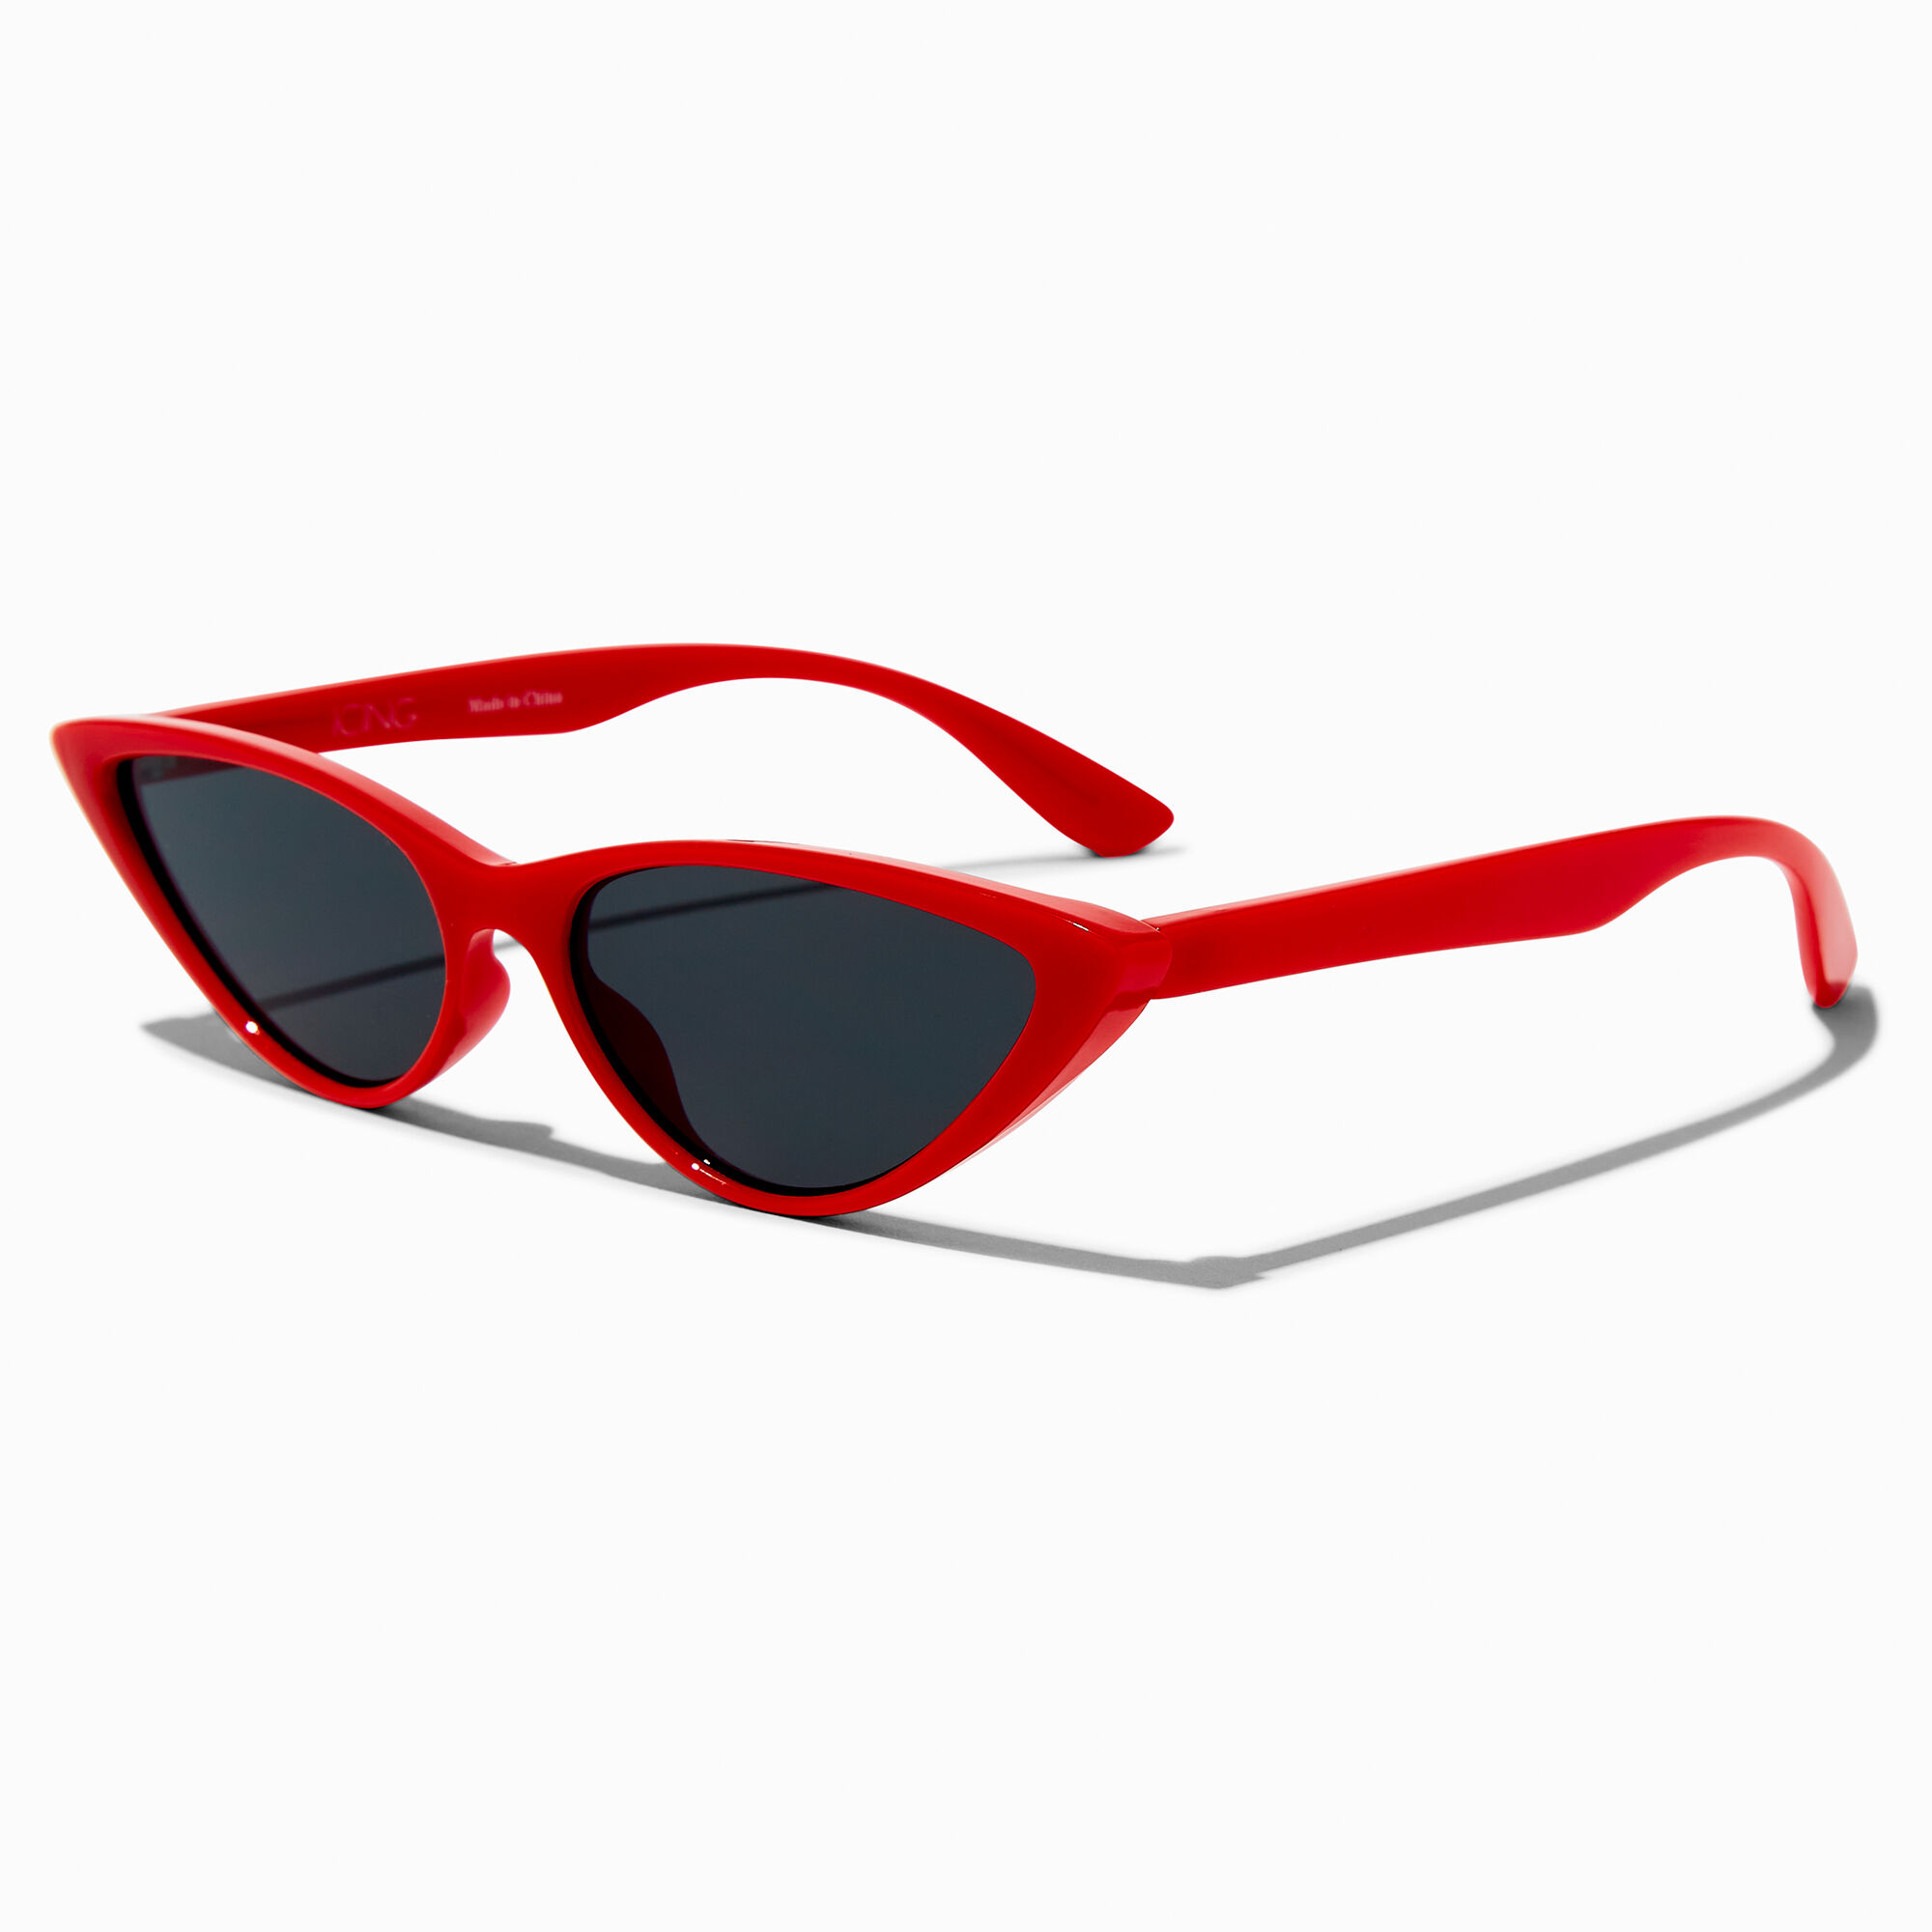 View Claires Slim Cat Eye Sunglasses Red information